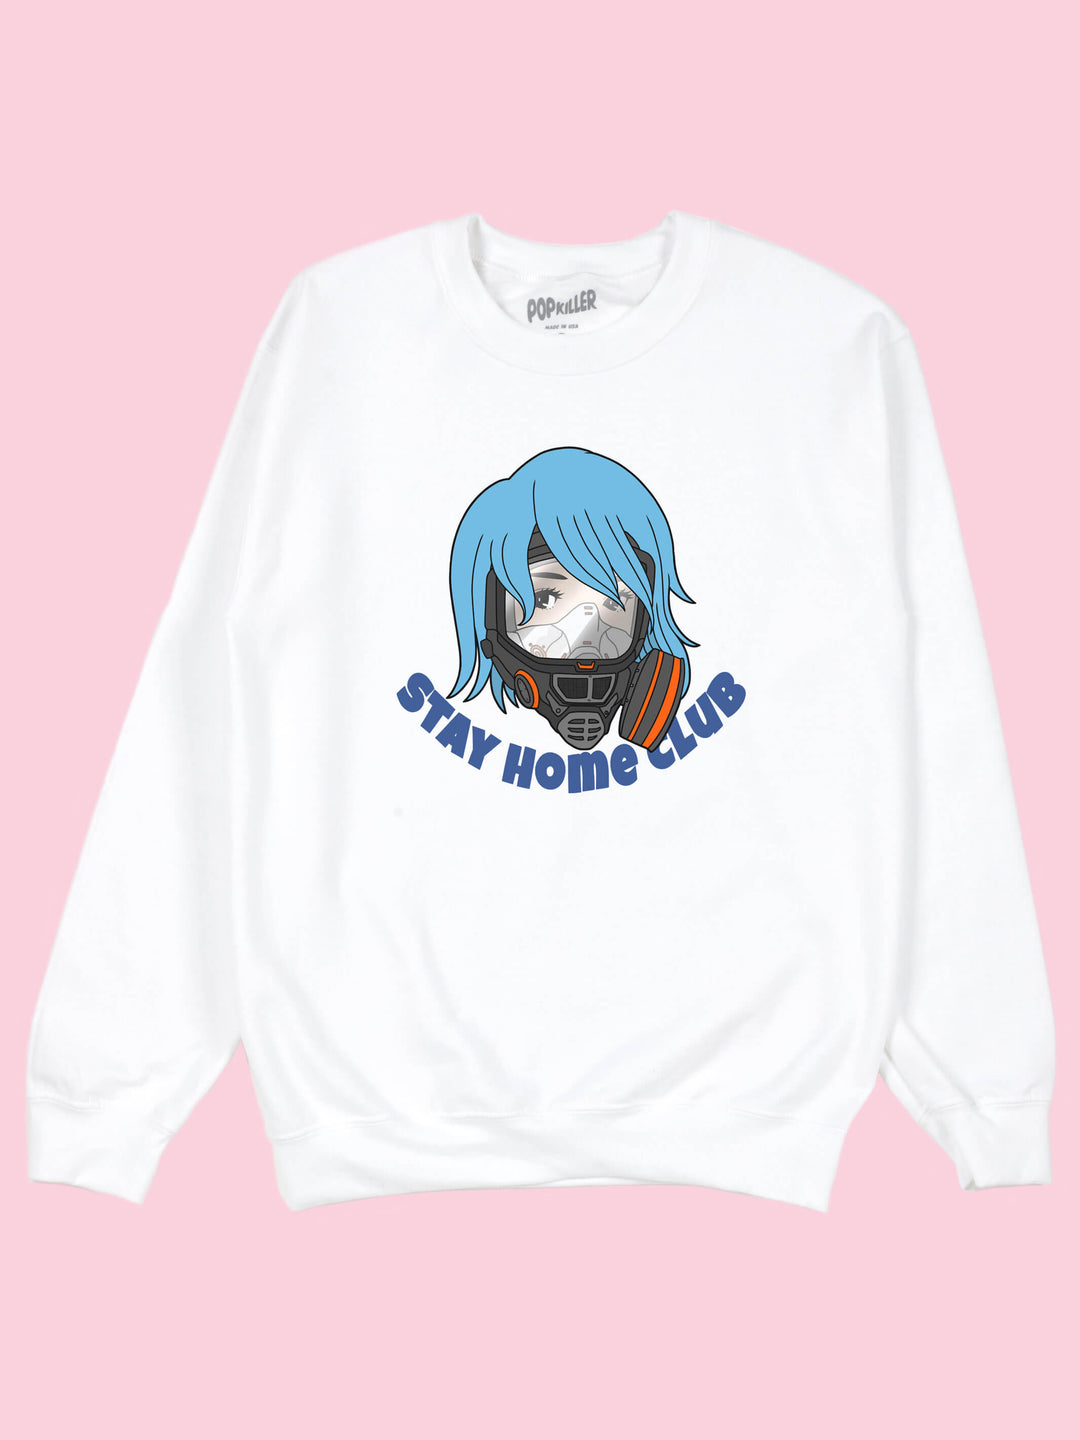 Anime stay home sweater.